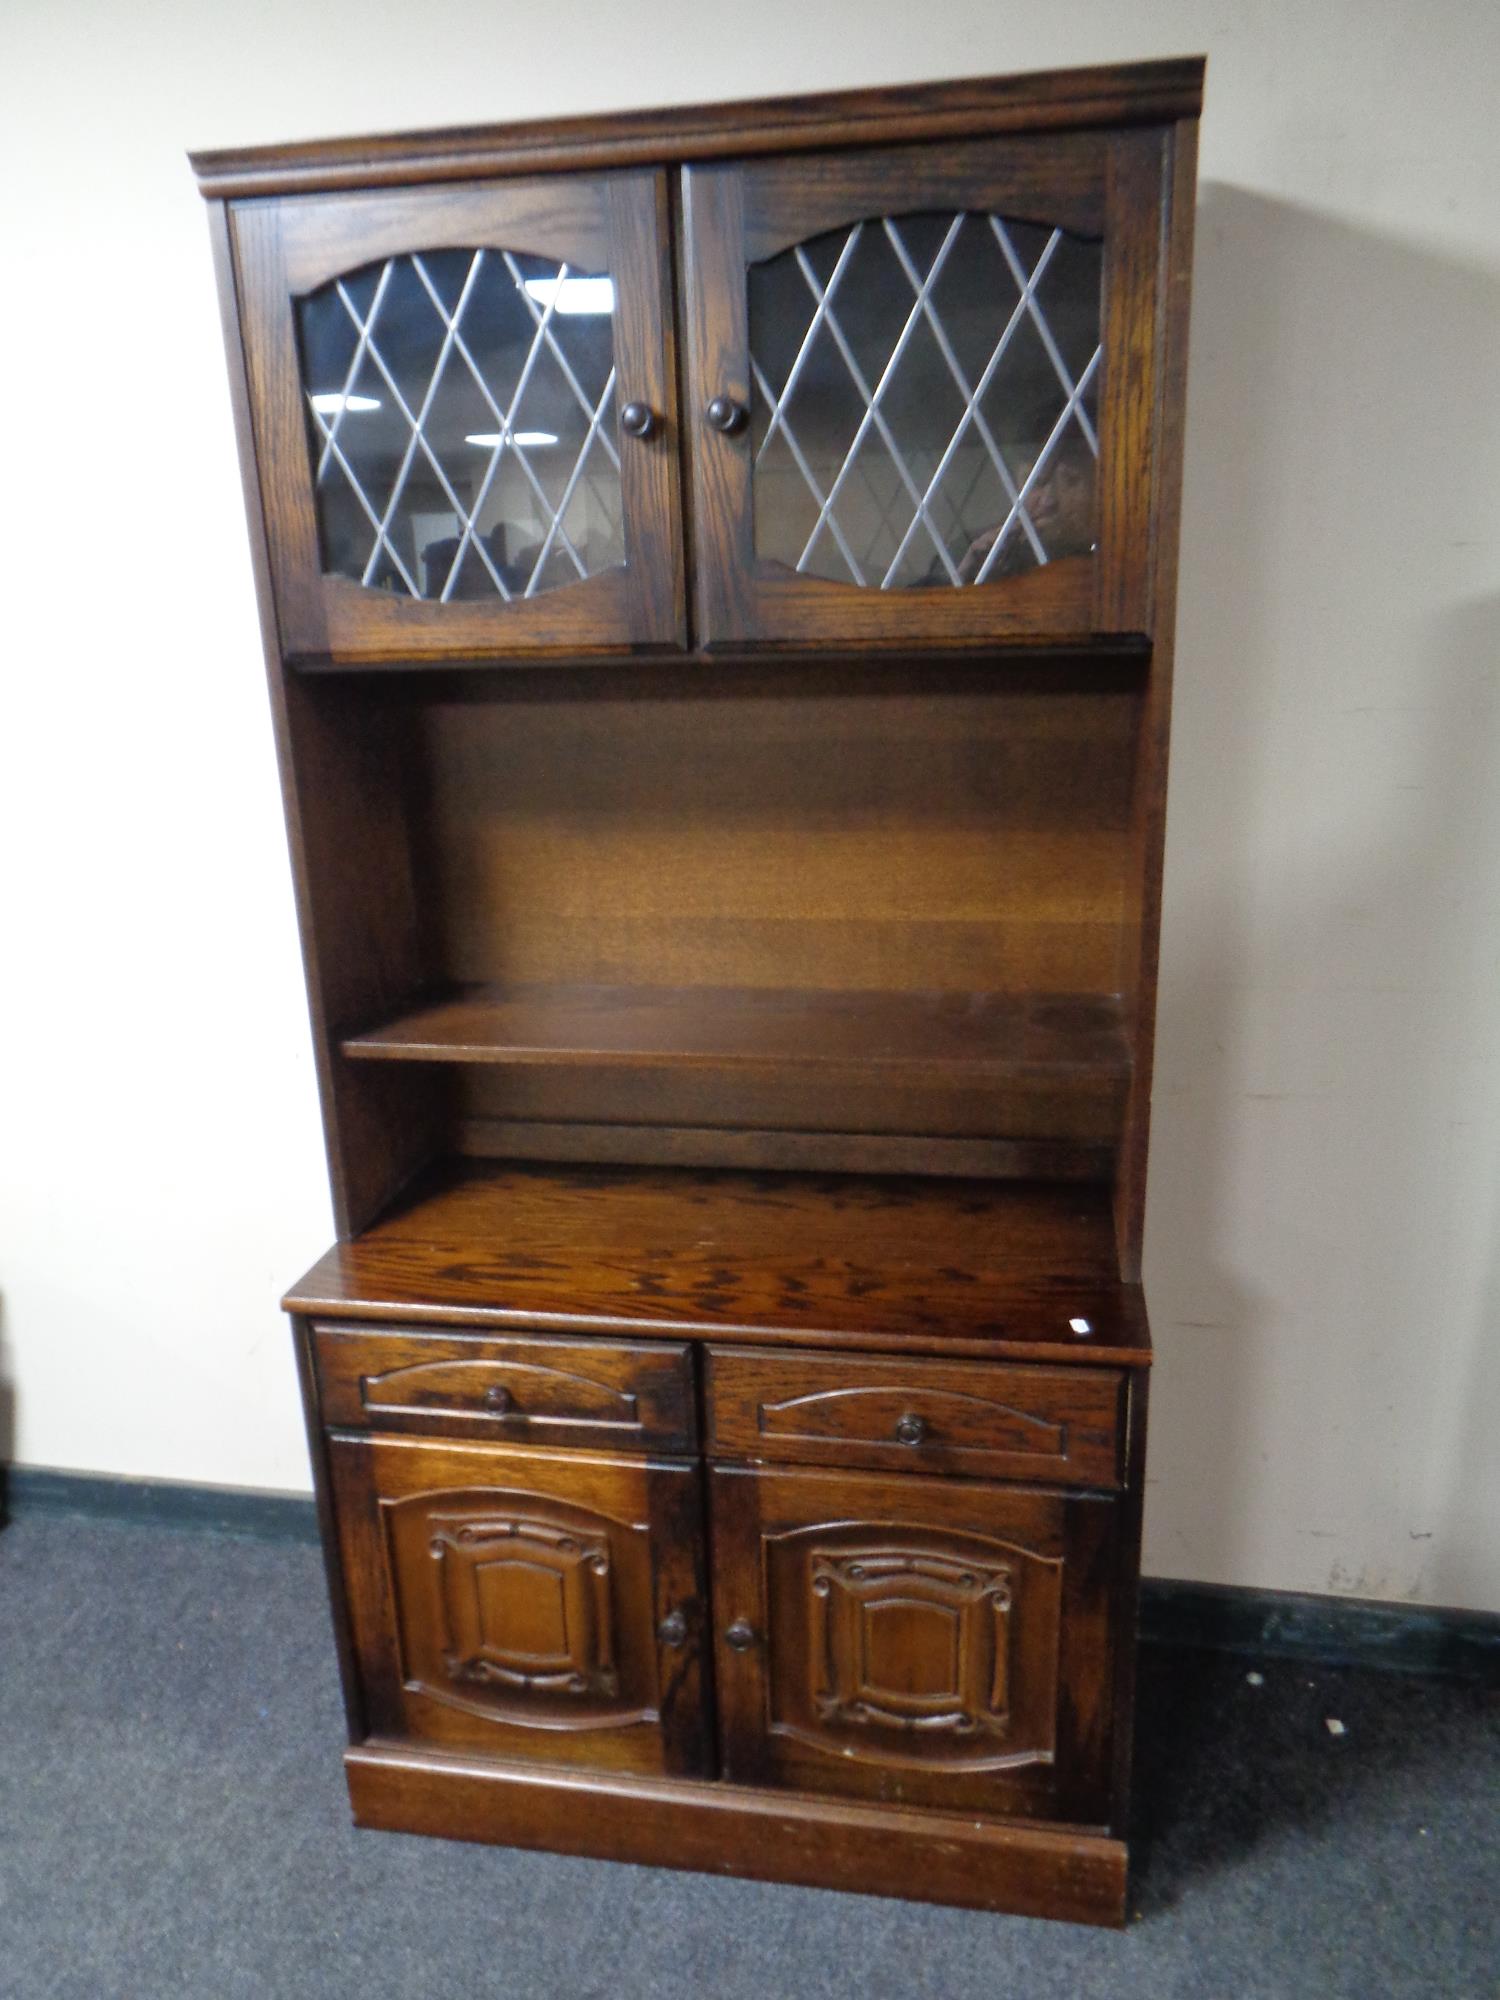 A display cabinet fitted double door cupboard and drawers beneath in an oak finish together with a